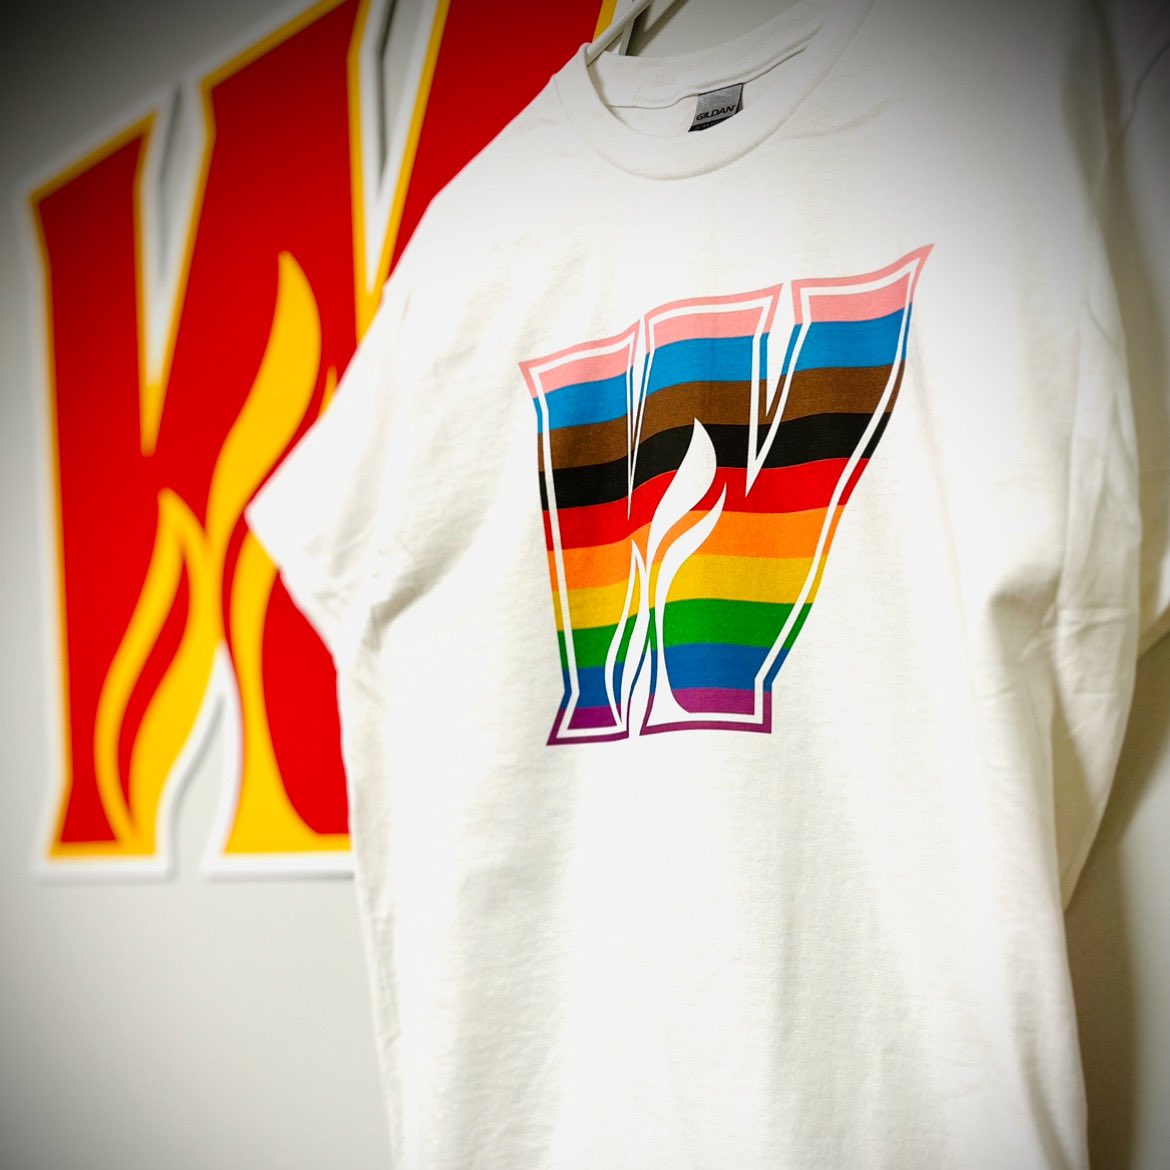 We have limited edition Wranglers Pride T-shirts available at the game tonight, with $5 from each shirt going to @YouCanPlayTeam!